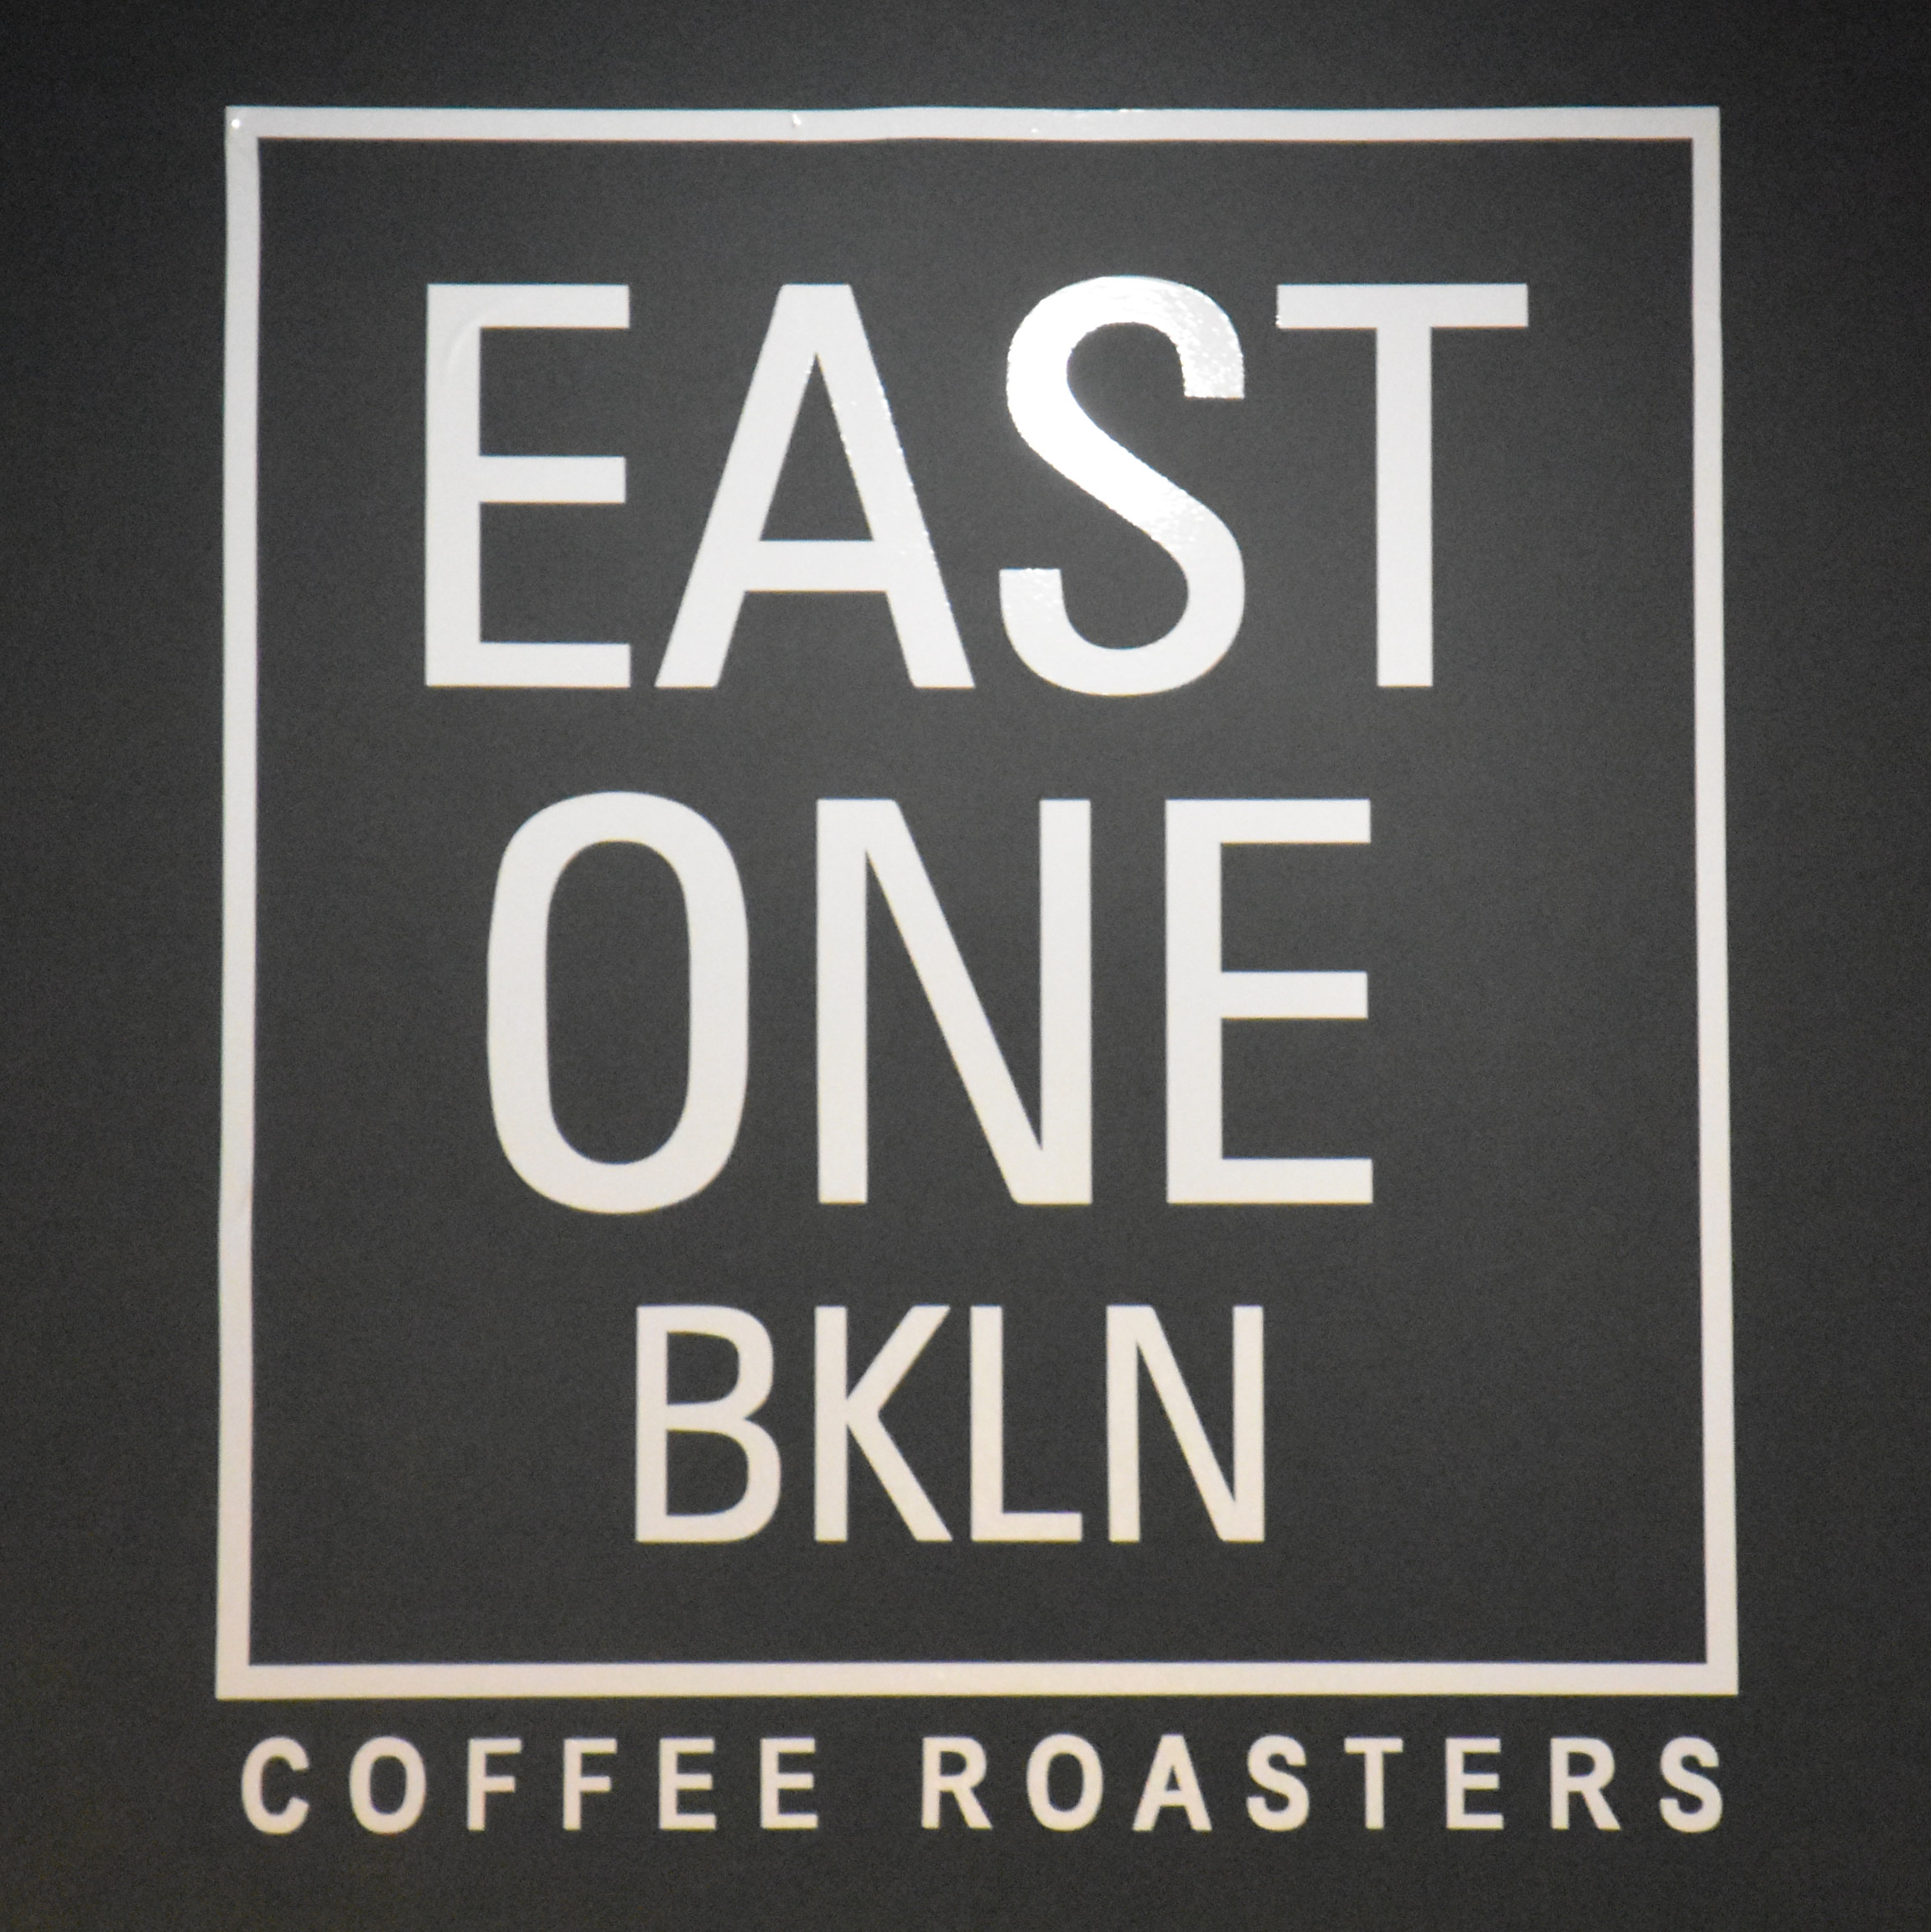 Detail from the wall of East One Coffee Roasters in midtown Manhattan: "EAST ONE BKLN" in white on black, outlined with a white square, with "COFFEE ROASTERS" underneath.